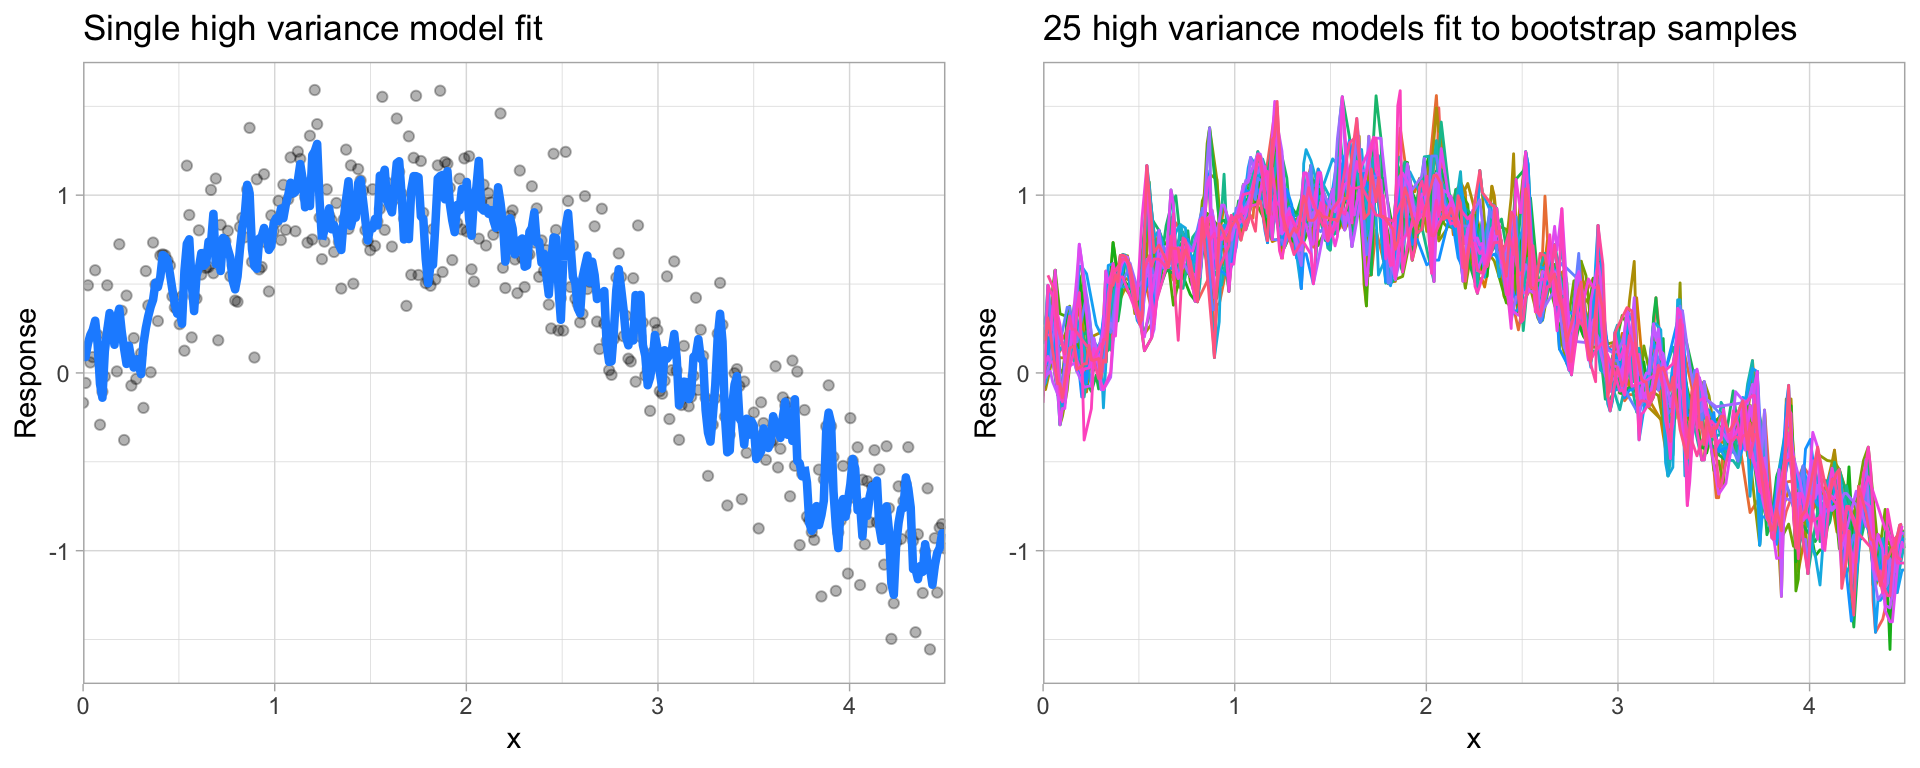 A high variance _k_-nearest neighbor model fit to a single data set captures the underlying non-linear, non-monotonic data structure well but also overfits to individual data points (left).  Models fit to 25 bootstrapped replicates of the data are deterred by the noise and generate highly variable predictions (right).